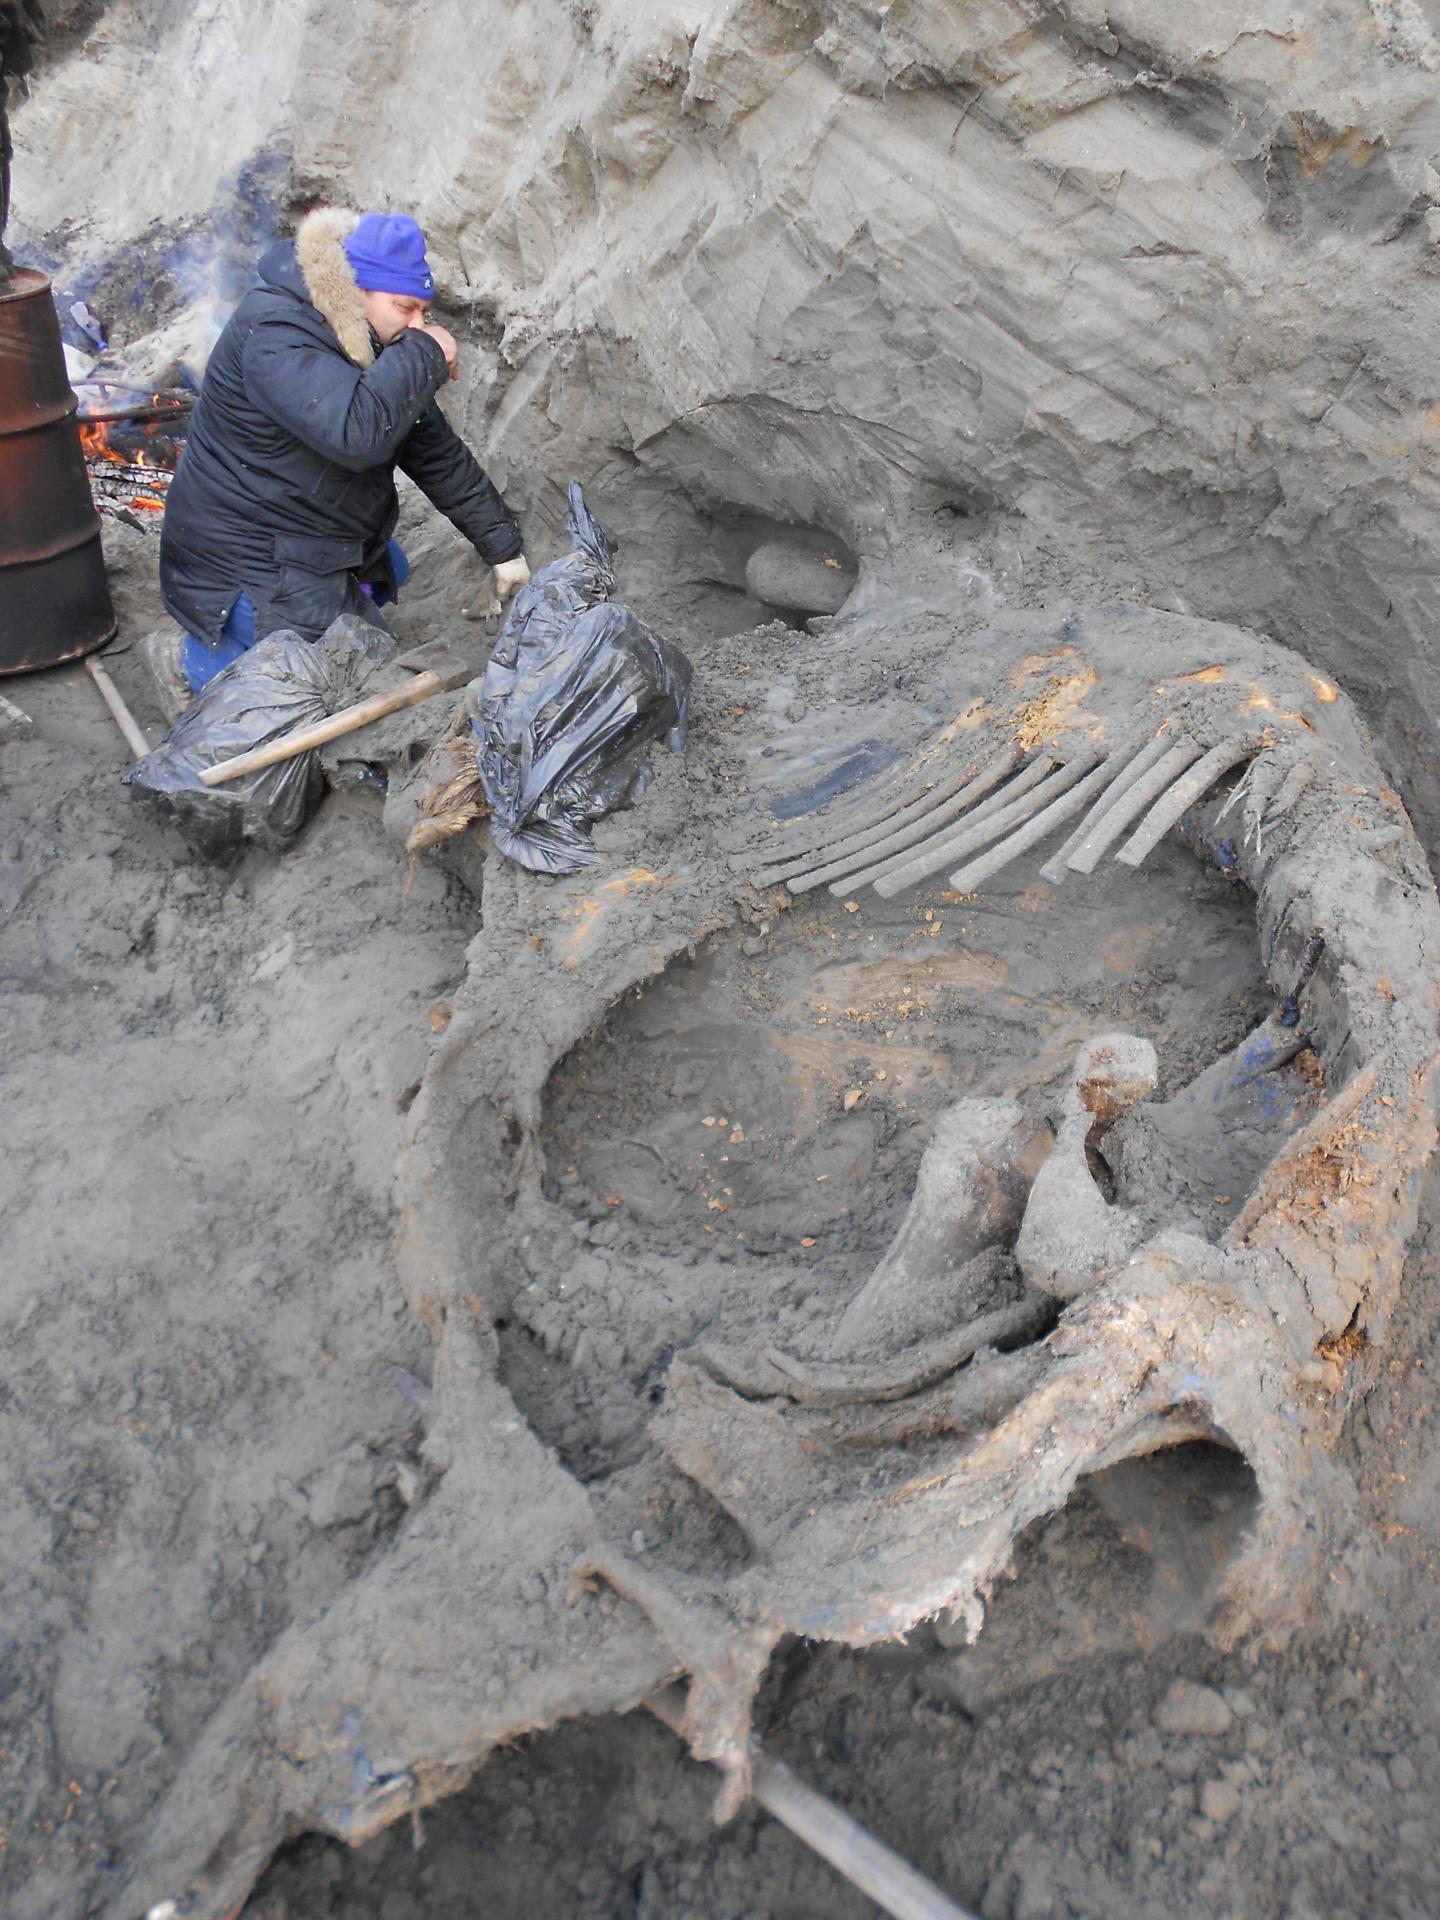 Mammoth Injuries Indicate Humans Occupied Arctic Earlier than Thought